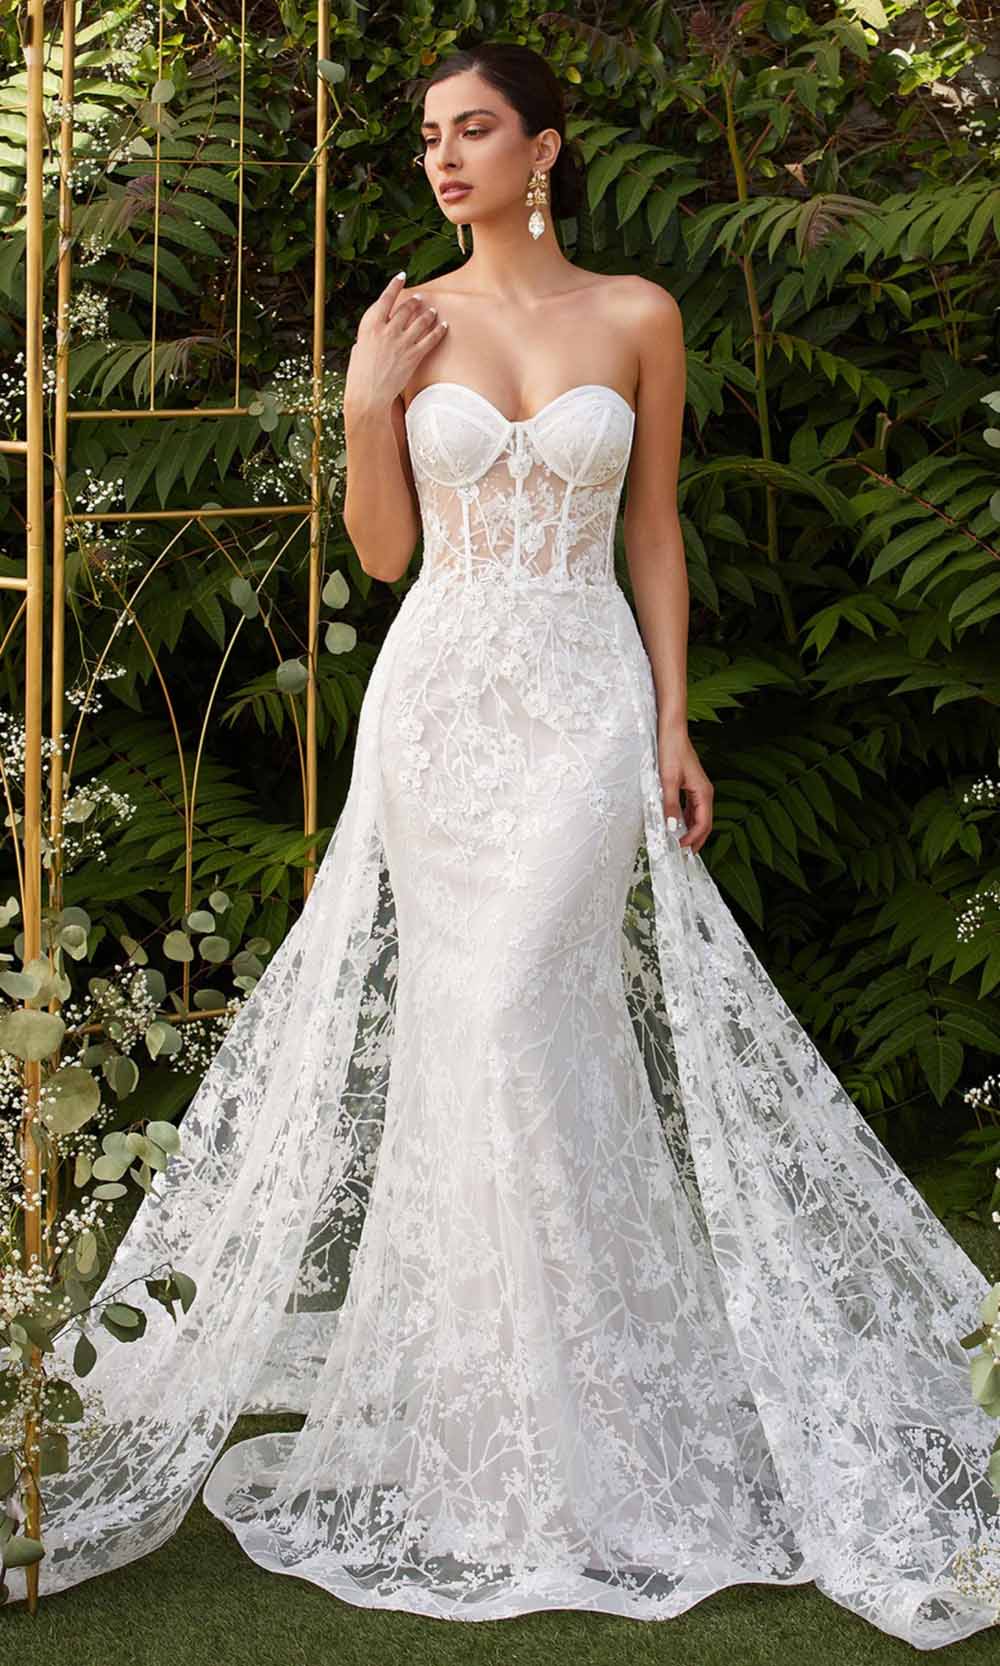 Cinderella Divine - CB046W Applique Sweetheart Gown With Overskirt Wedding Dresses 2 / Off White